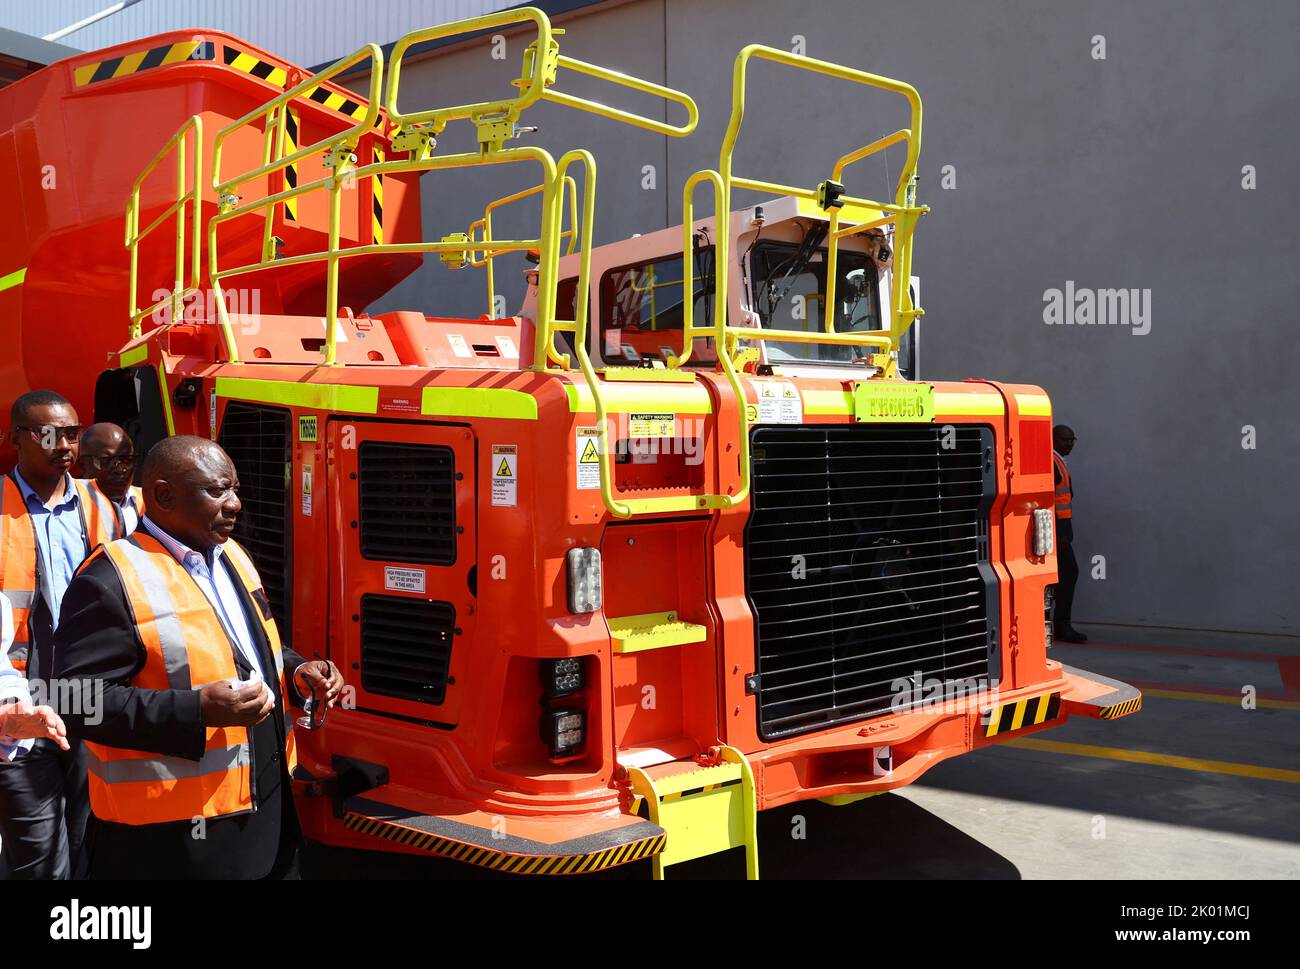 South Africa's President Cyril Ramaphosa walks past a mining truck during the launch of the new Sandvik Khomanani manufacturing site, at Khomanani, in Kempton Park, Johannesburg, South Africa September 9, 2022. REUTERS/Siphiwe Sibeko Stock Photo